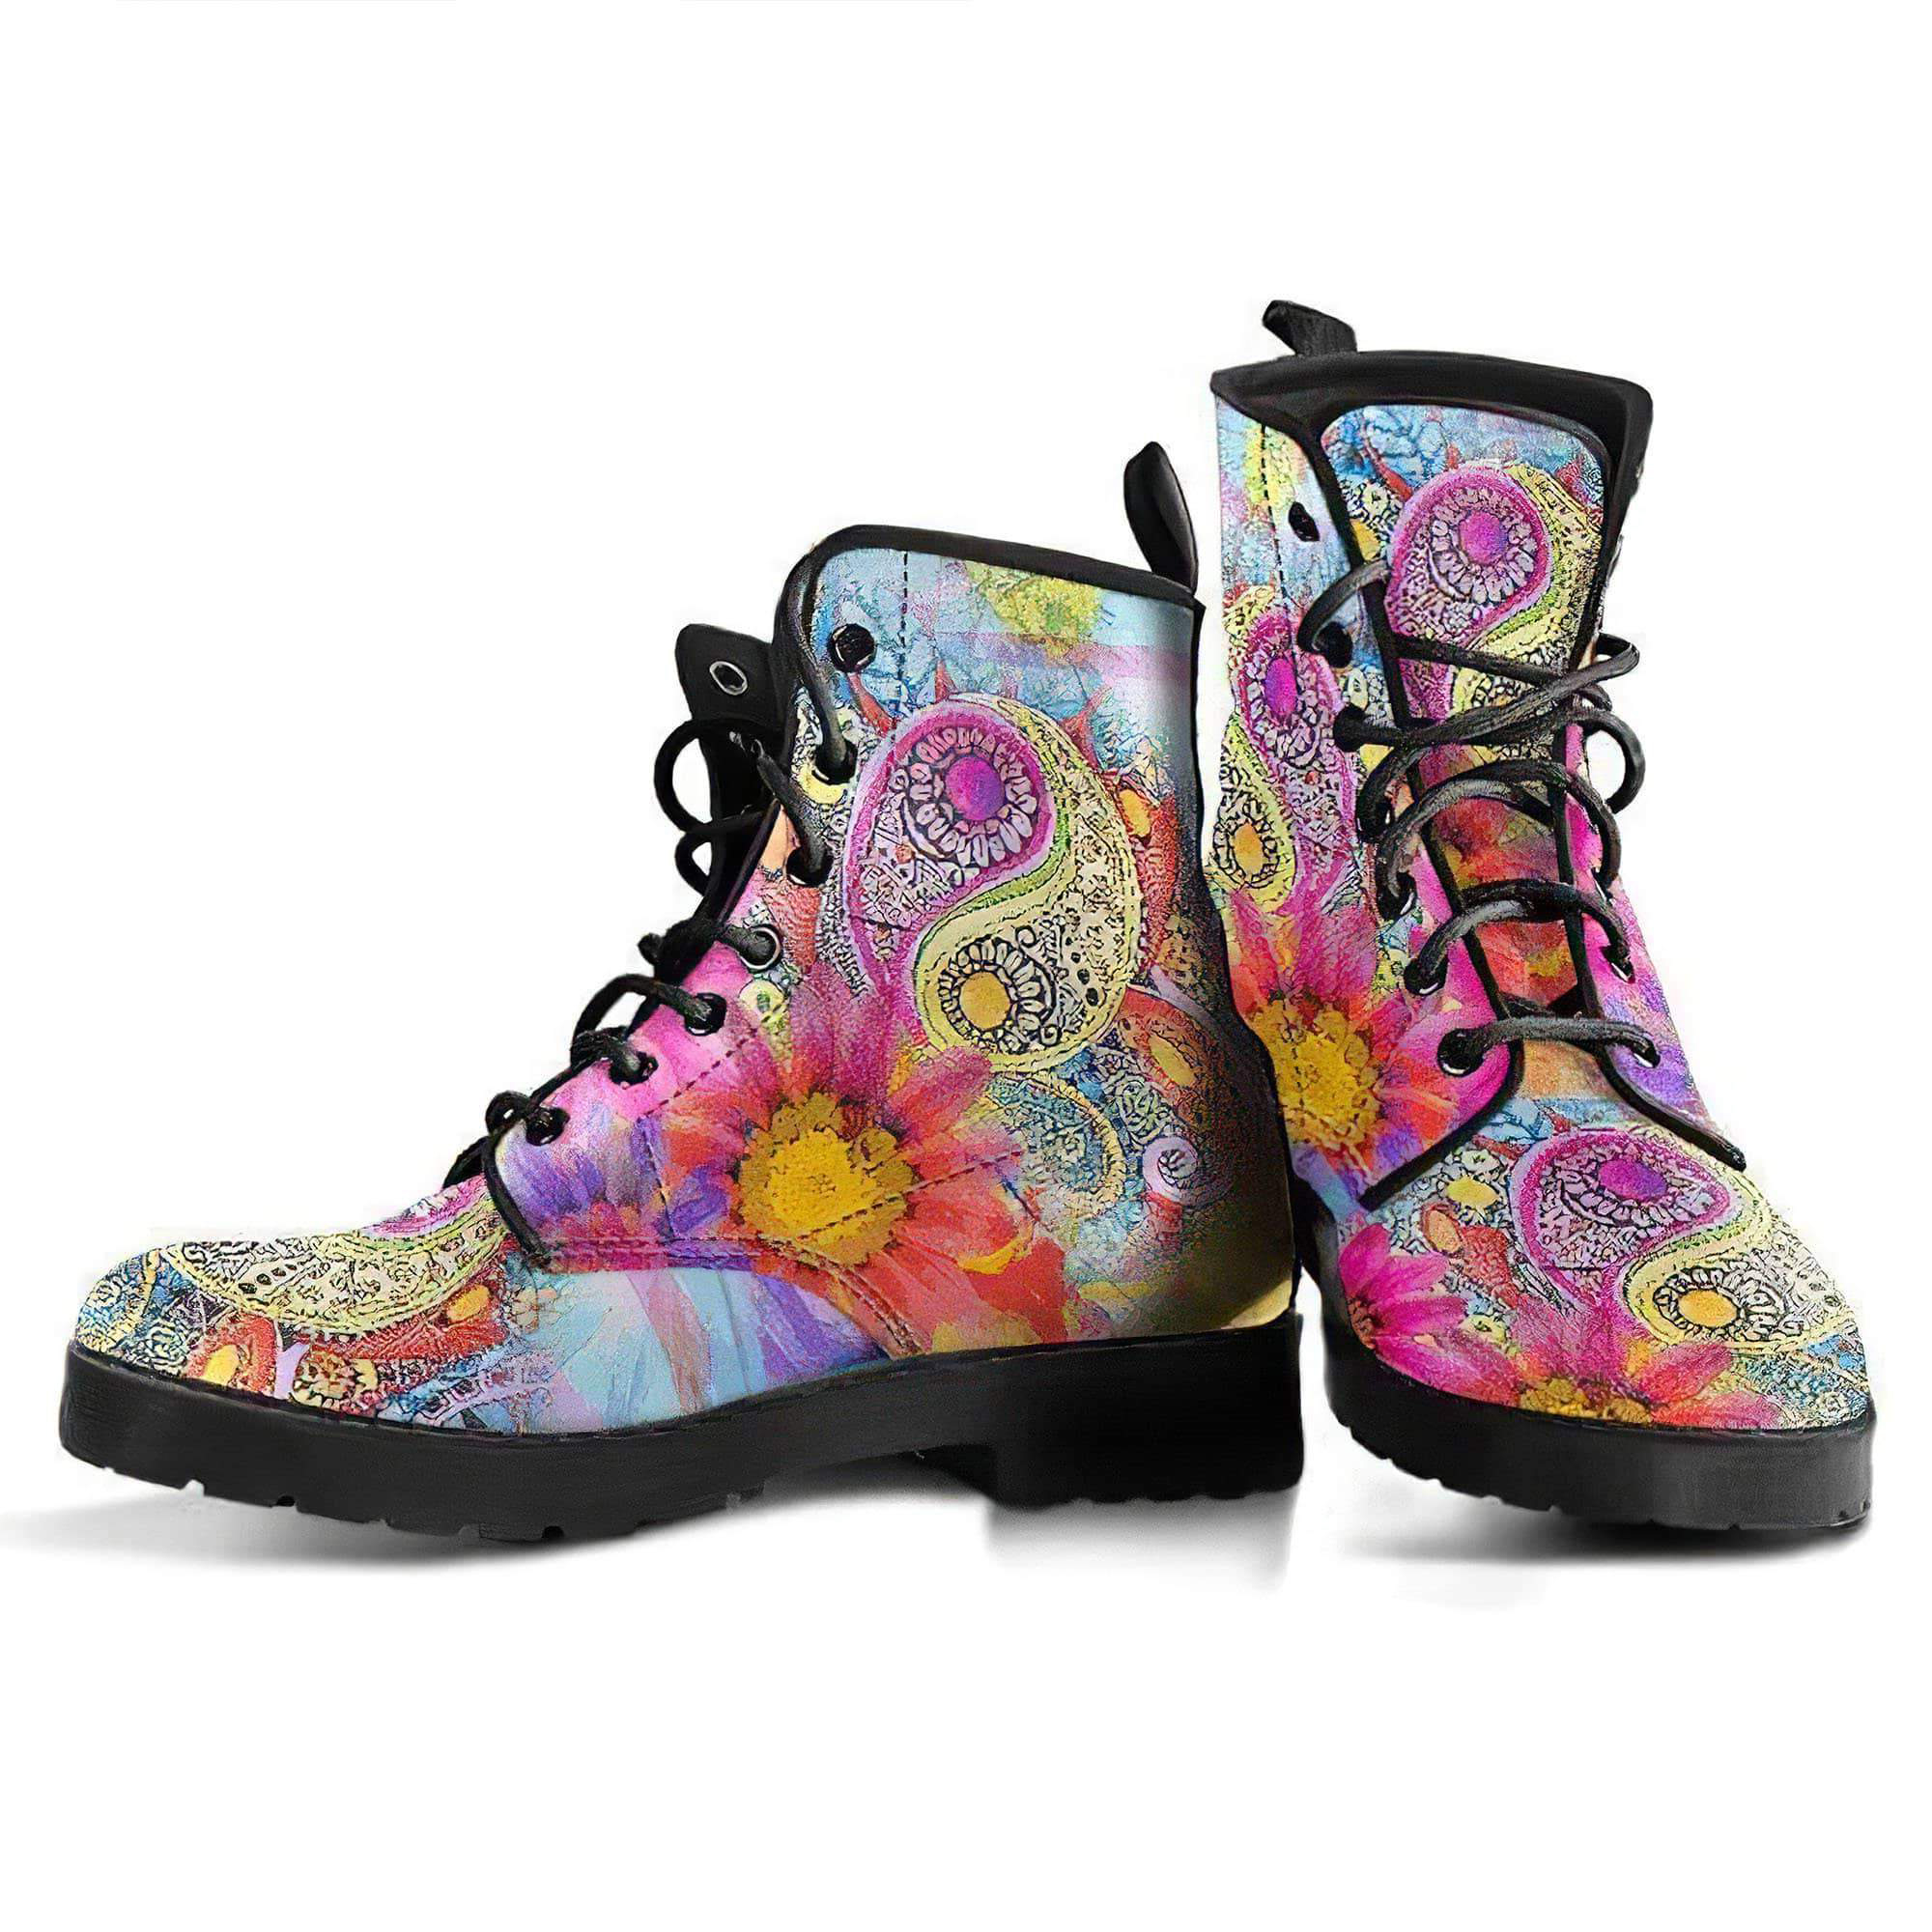 yinyang-floral-handcrafted-boots-women-s-leather-boots-12051979894845.jpg